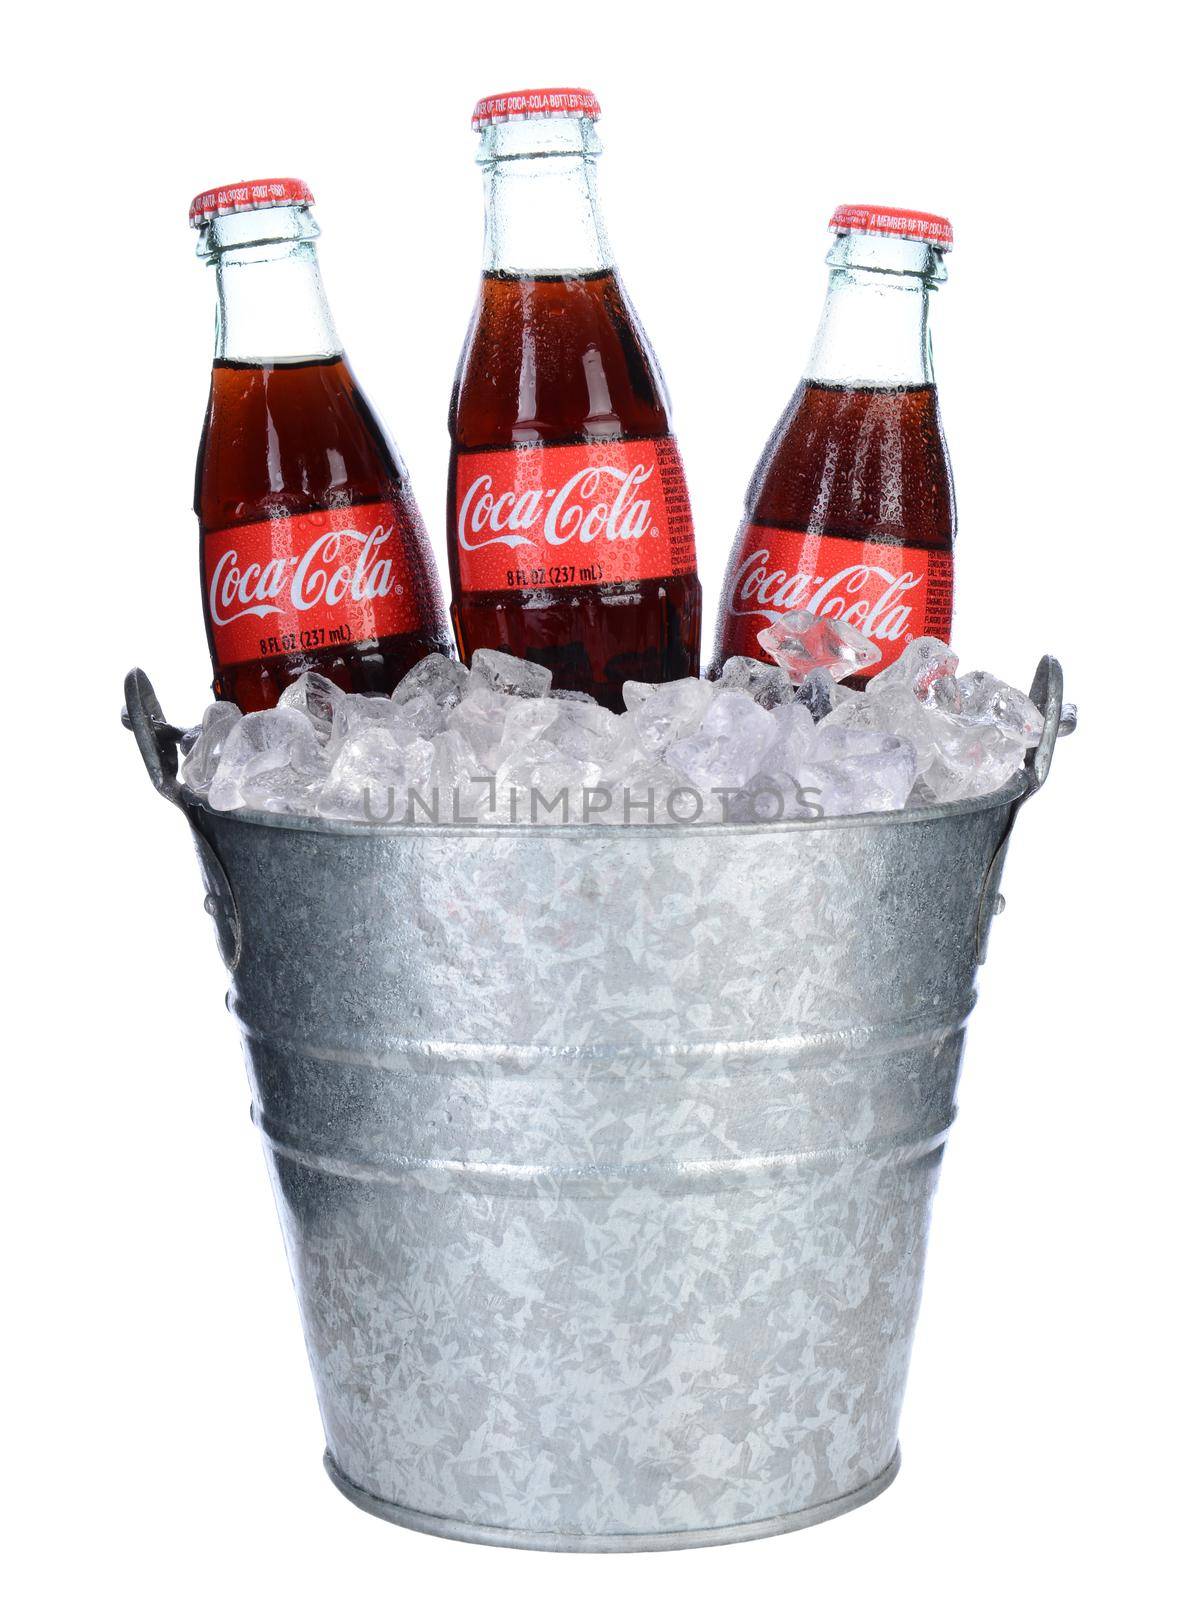 IRVINE, CA - February 06, 2014: Threes bottles of Coca-Cola in and Ice bucket. Coke is one of the most popular soft drinks in the world.